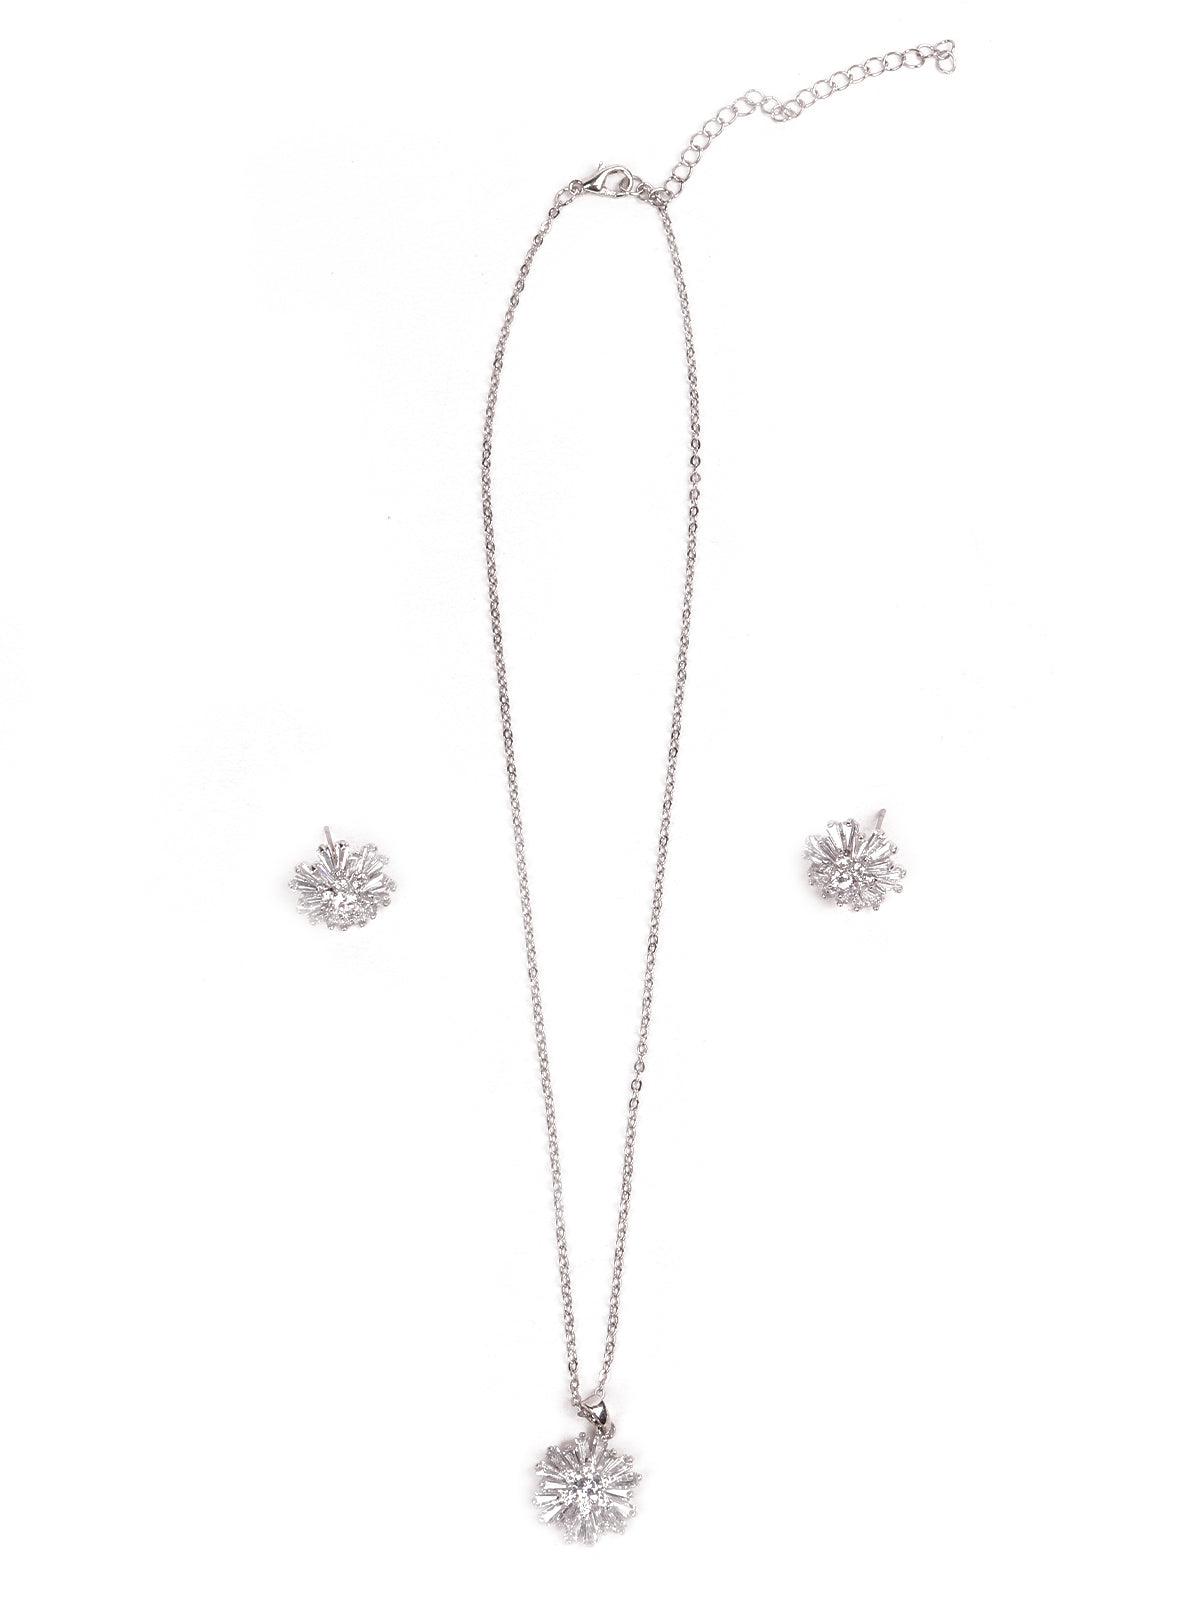 Women's Gorgeous Crystal Beautiful Necklace Set - Odette